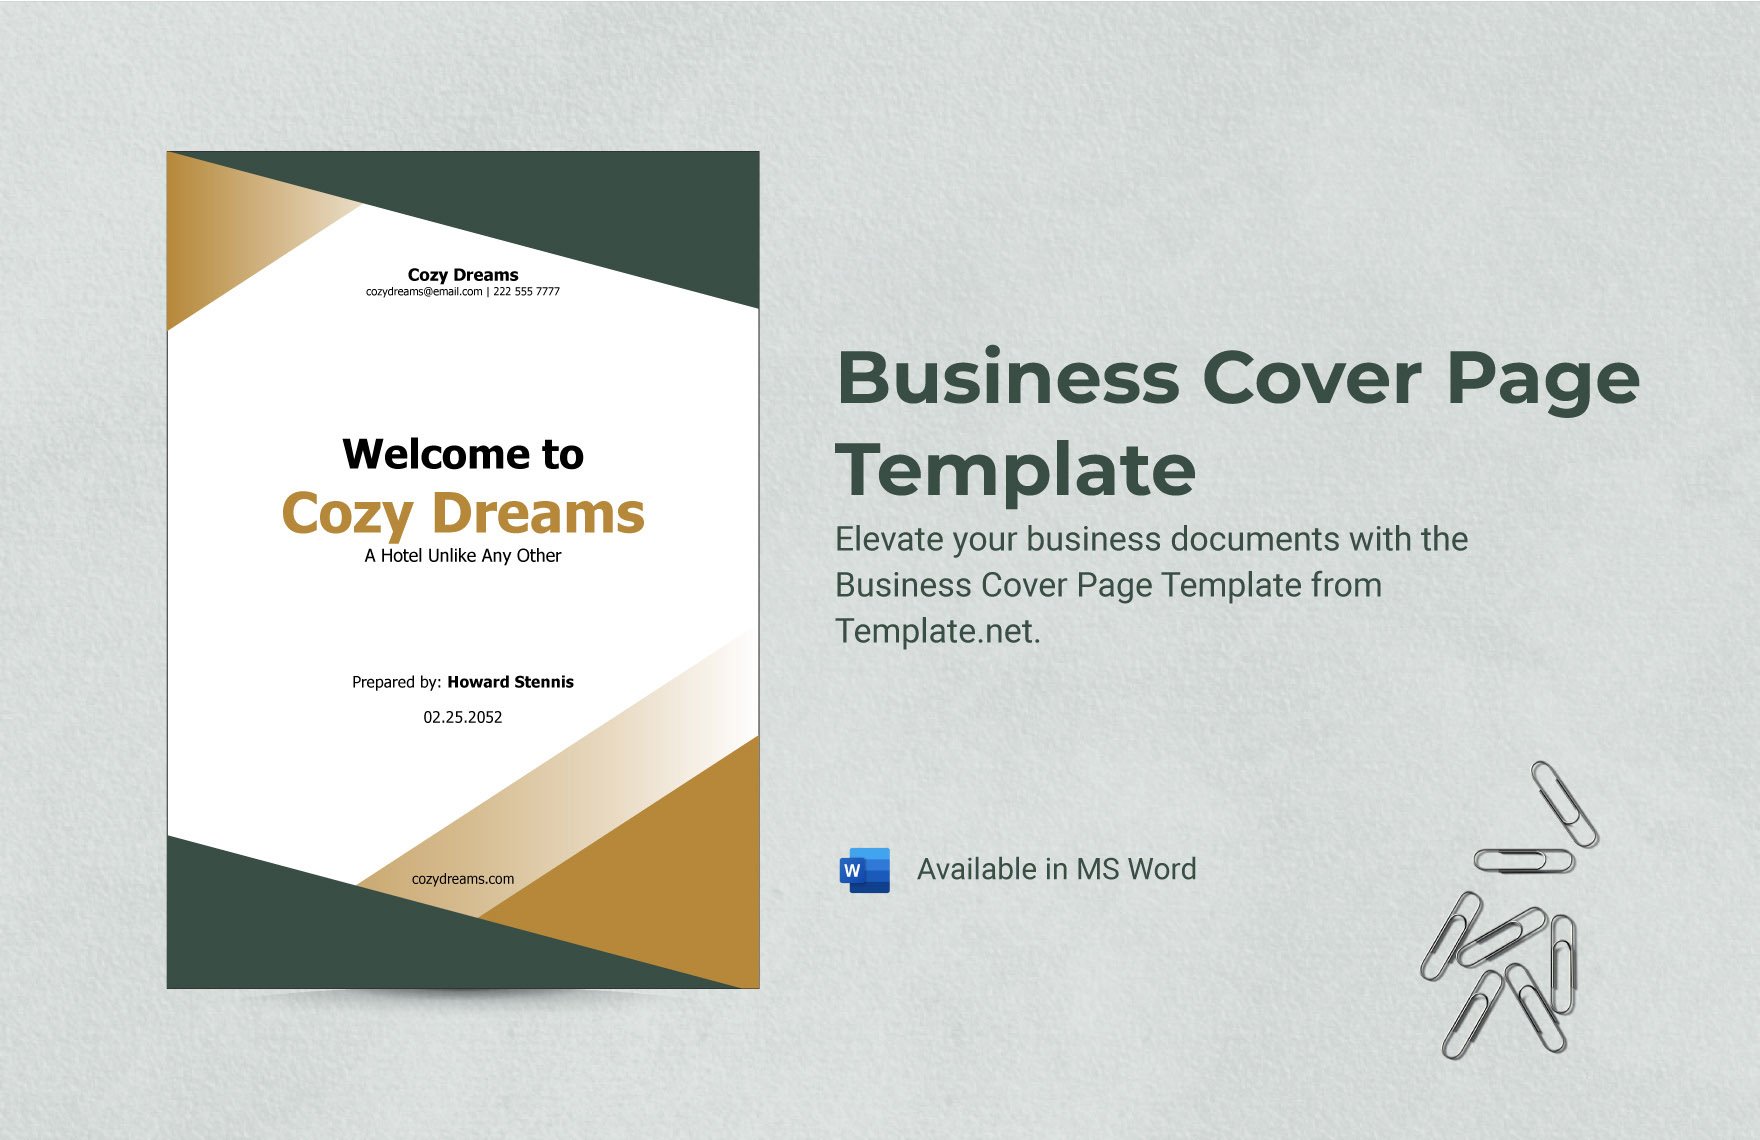 Business Cover Page Template